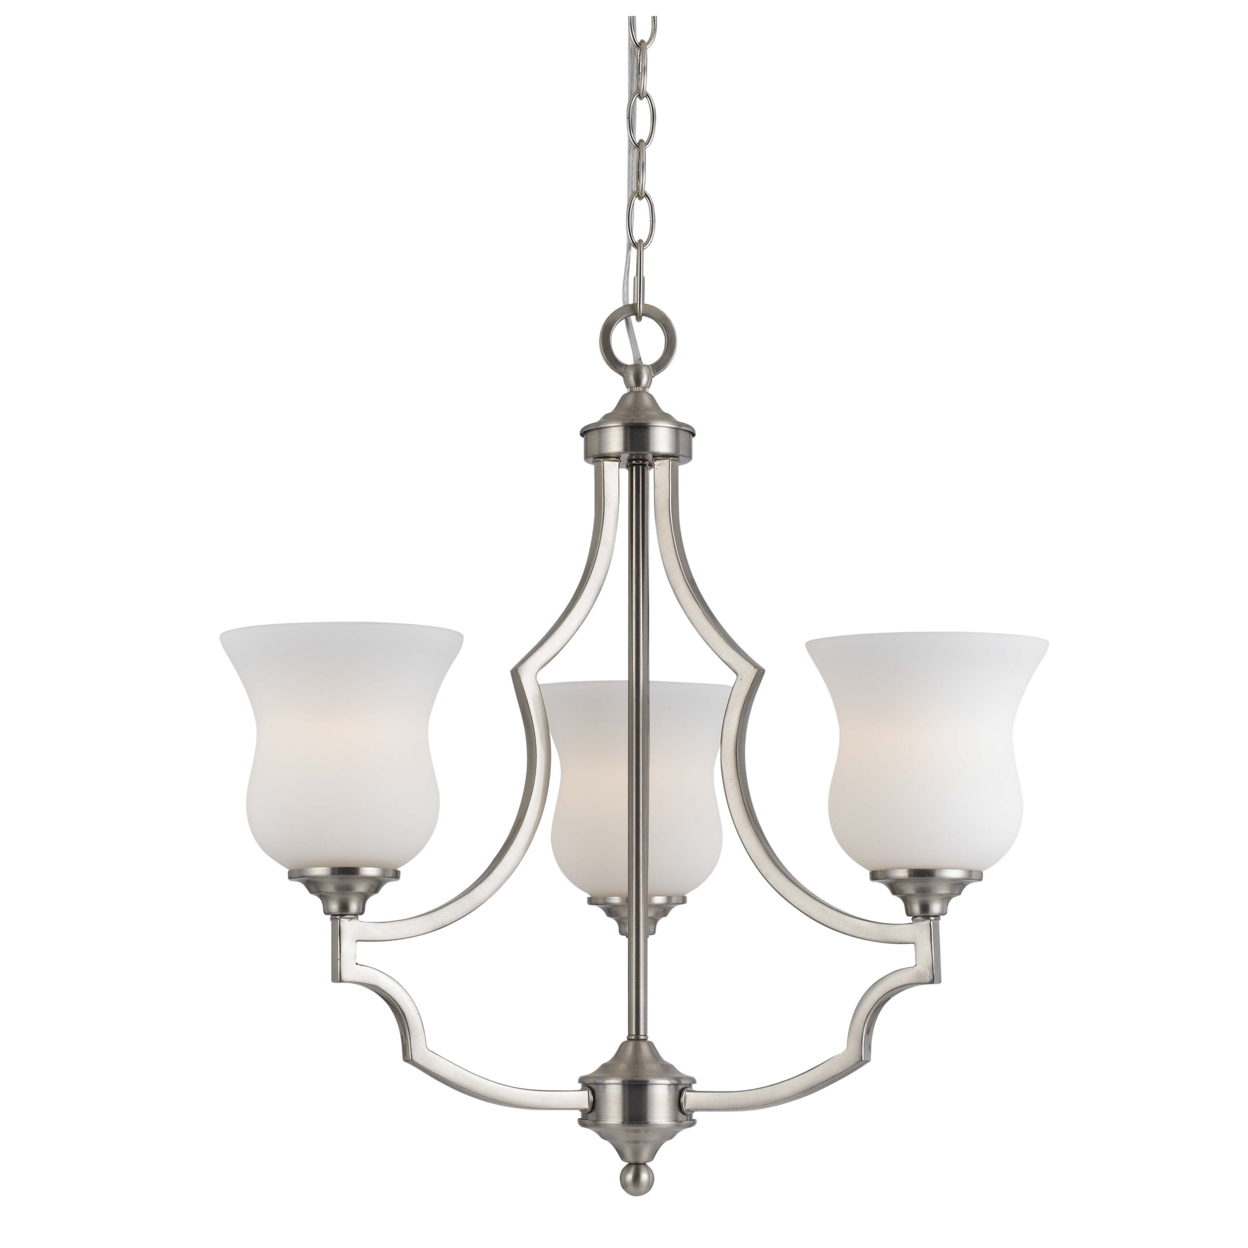 3 Bulb Uplight Chandelier With Metal Frame And Glass Shades,Silver And White- Saltoro Sherpi